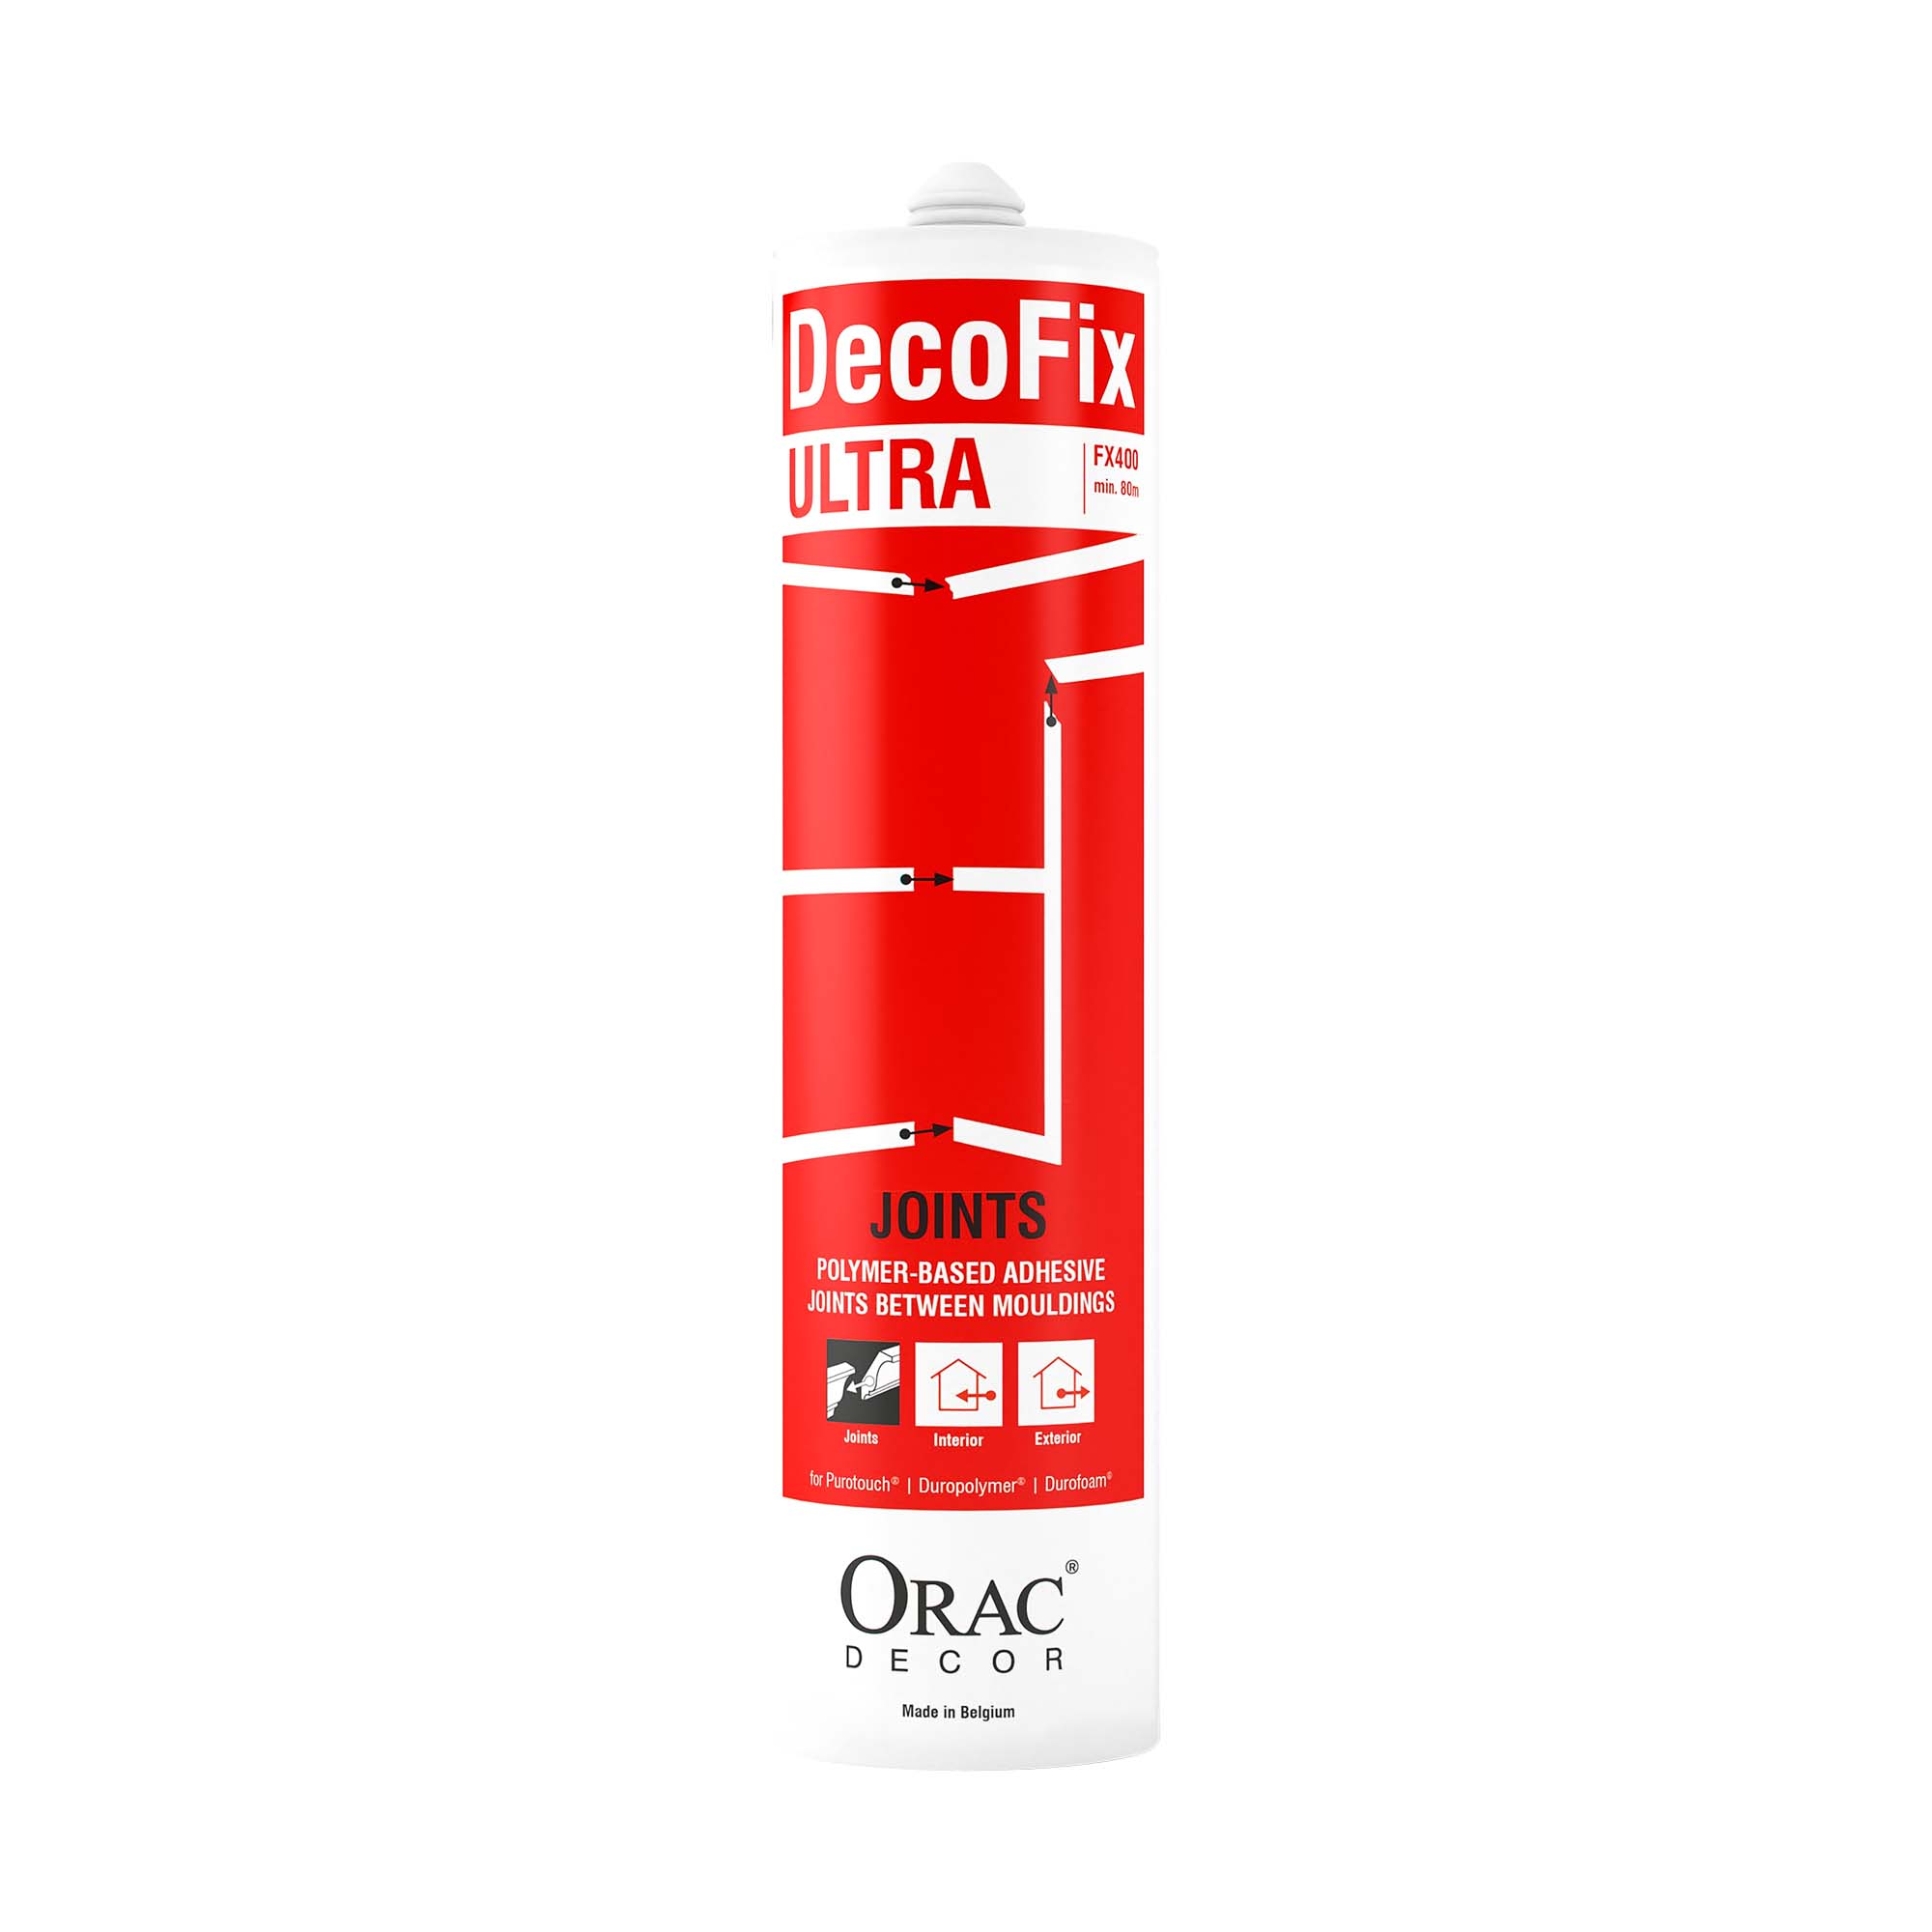 DecoFix Ultra Adhesive Cartridge - For Joints